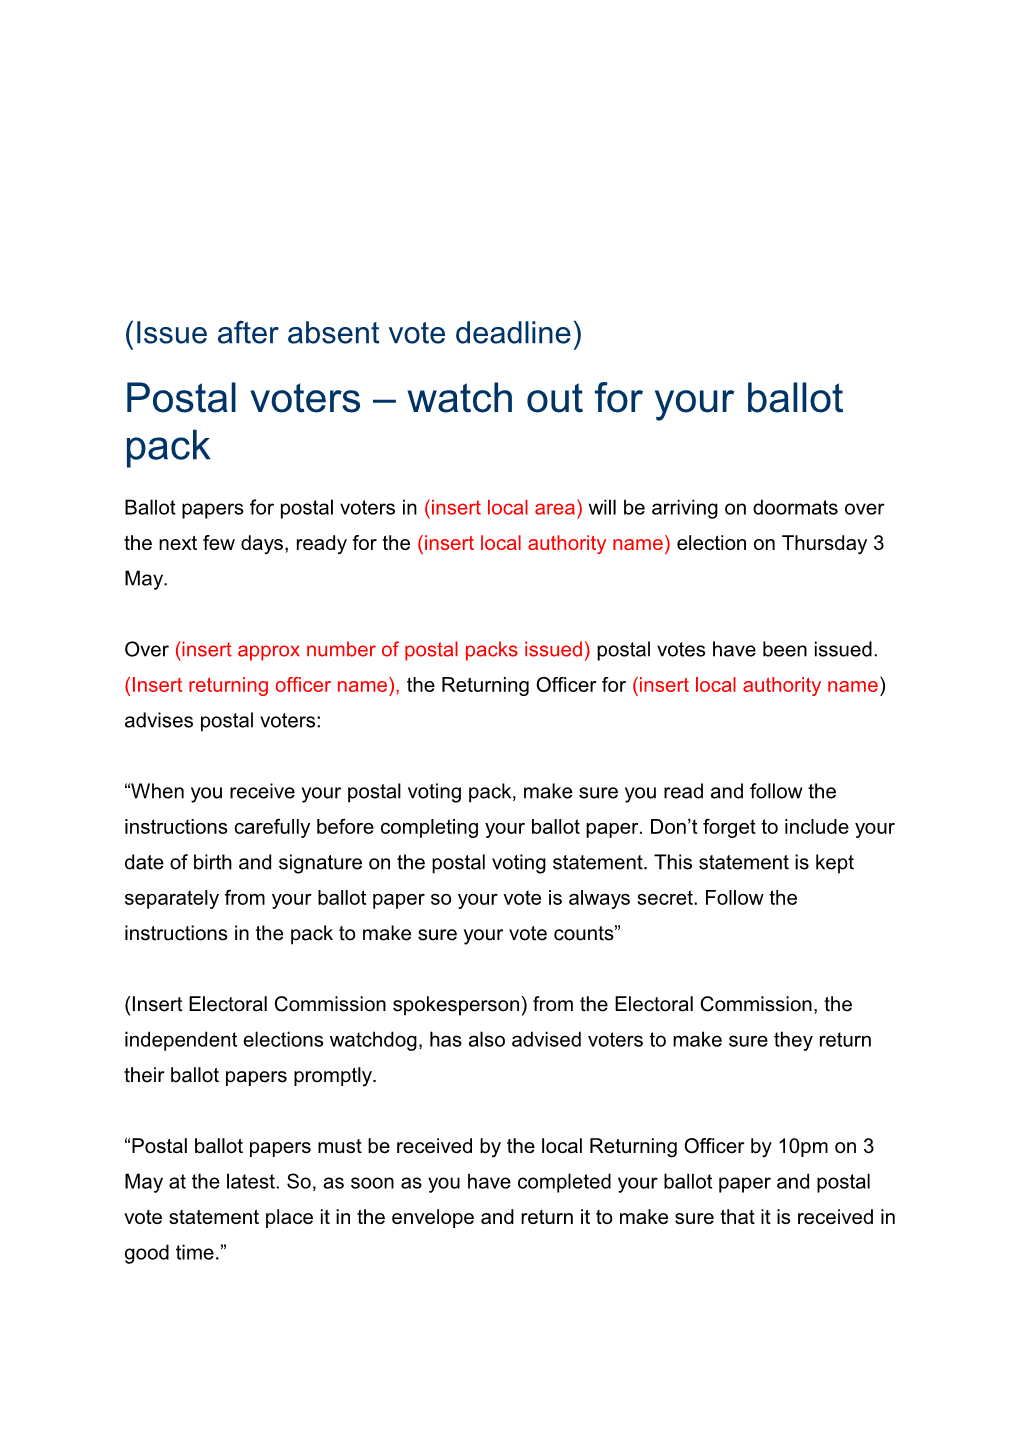 Postal Voters Watch out for Your Ballot Pack